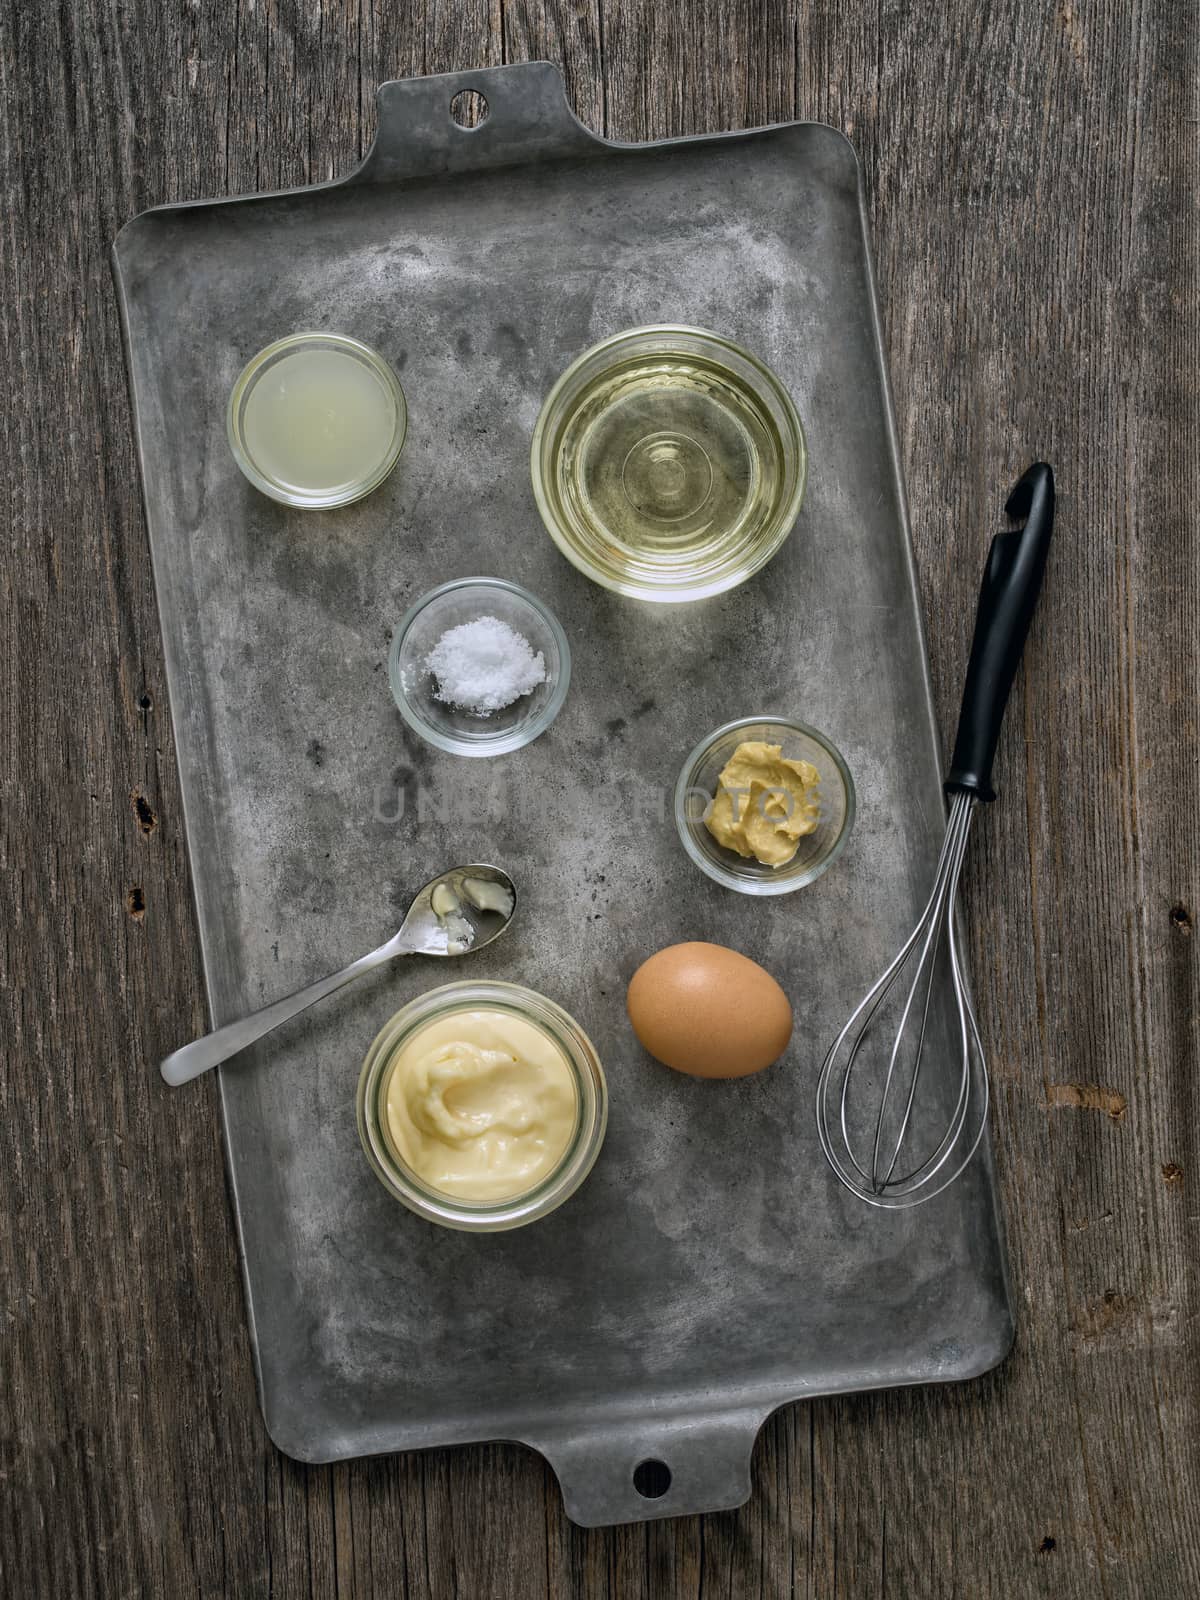 rustic homemade mayonnaise and ingredient by zkruger